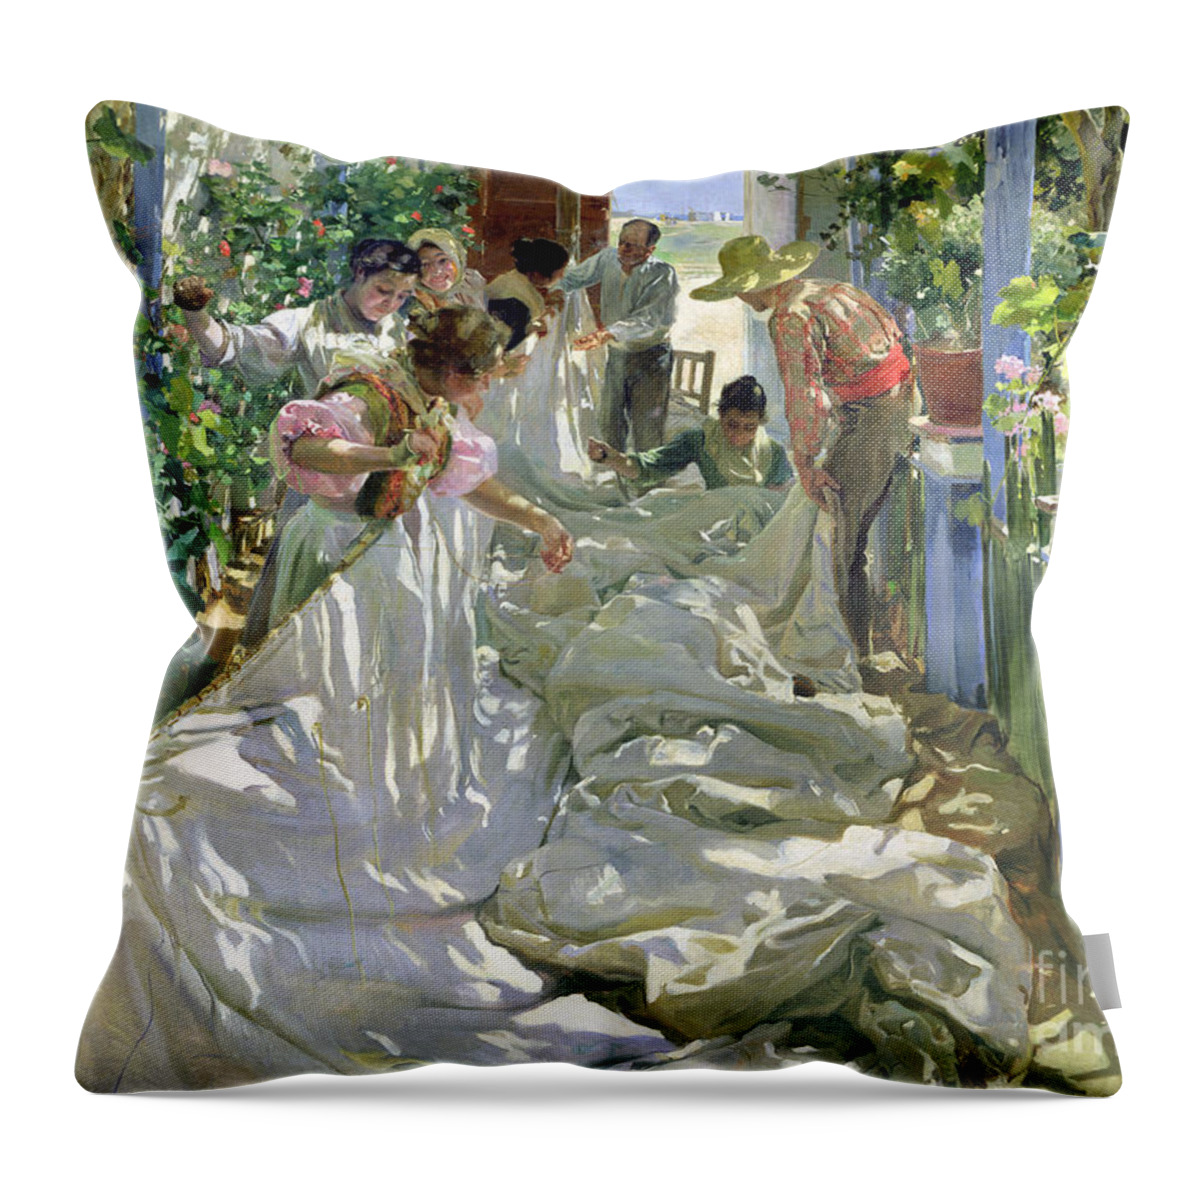 Sewing;straw Hat;geranium;sunshine;worker;workers;greenhouse;conservatory;interior; Pagoda Throw Pillow featuring the painting Mending the Sail by Joaquin Sorolla y Bastida